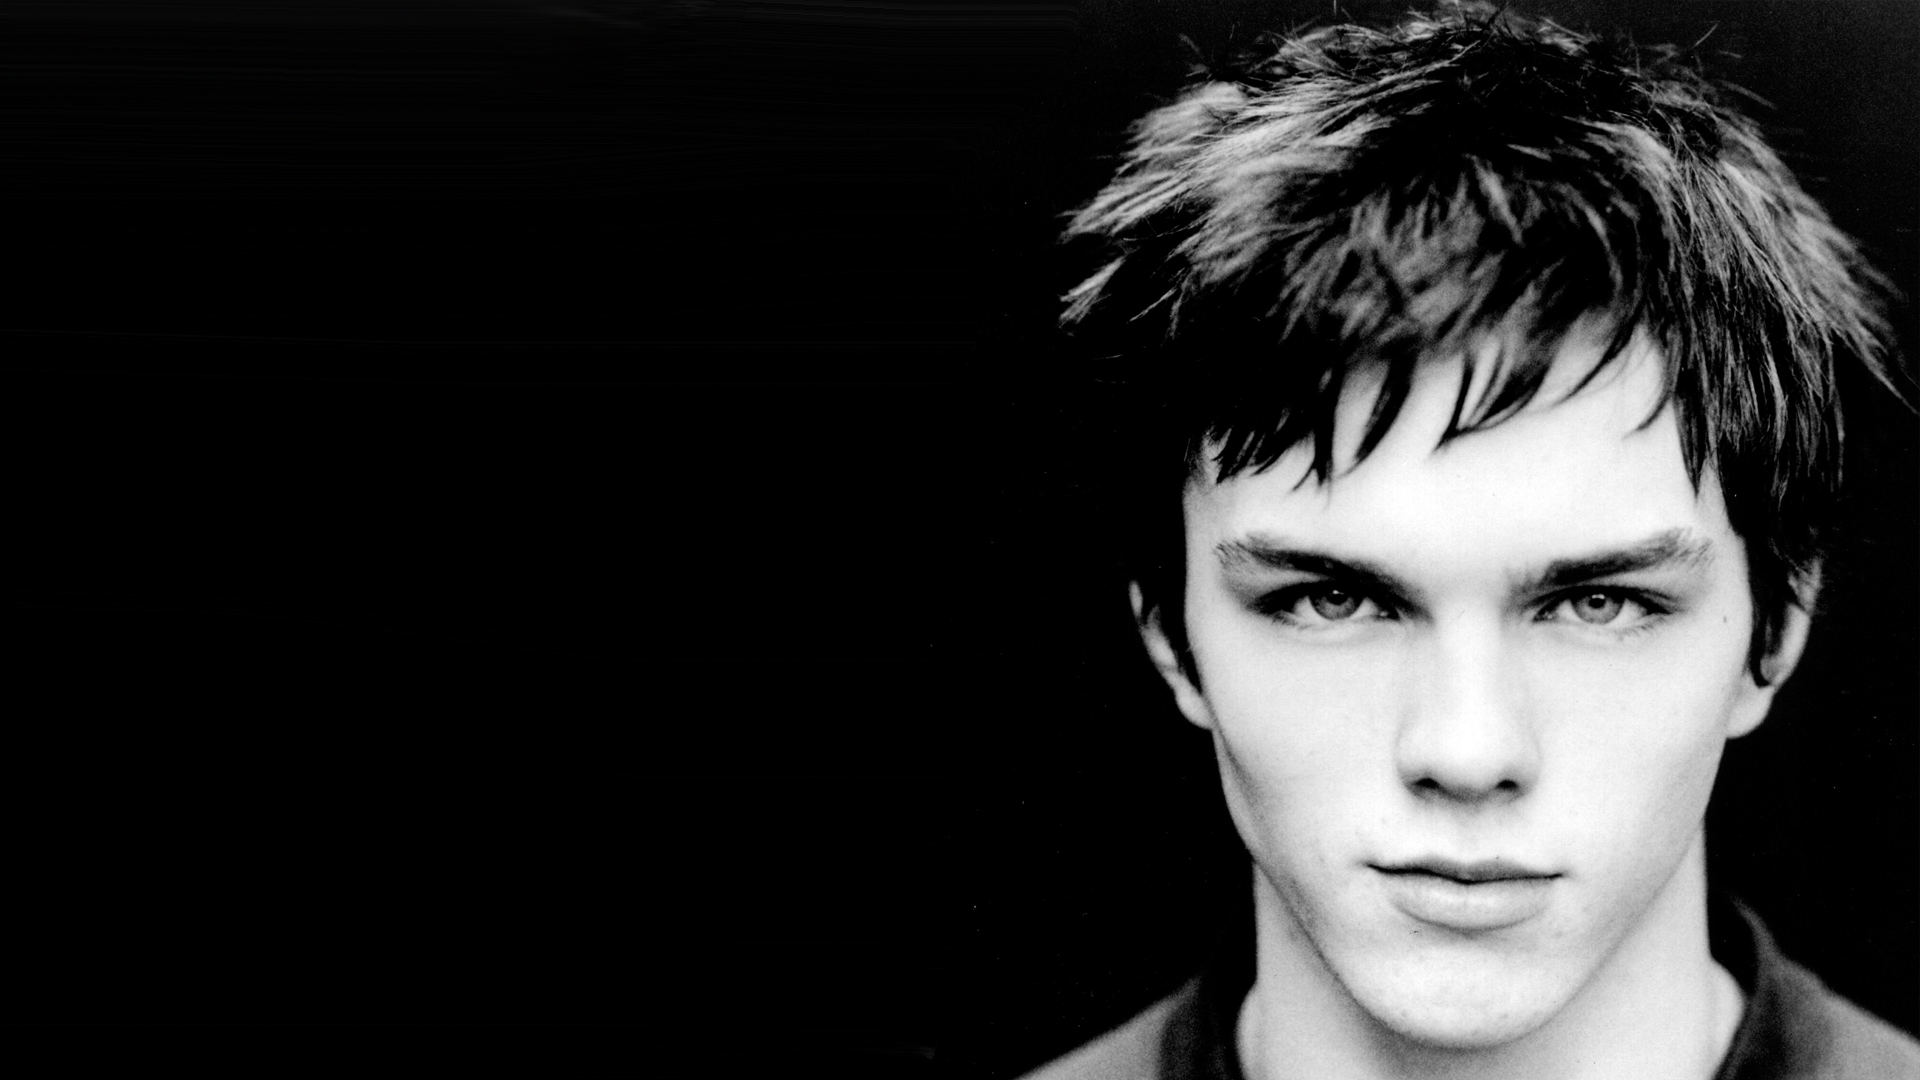 Nicholas Hoult Wallpapers High Resolution and Quality Download